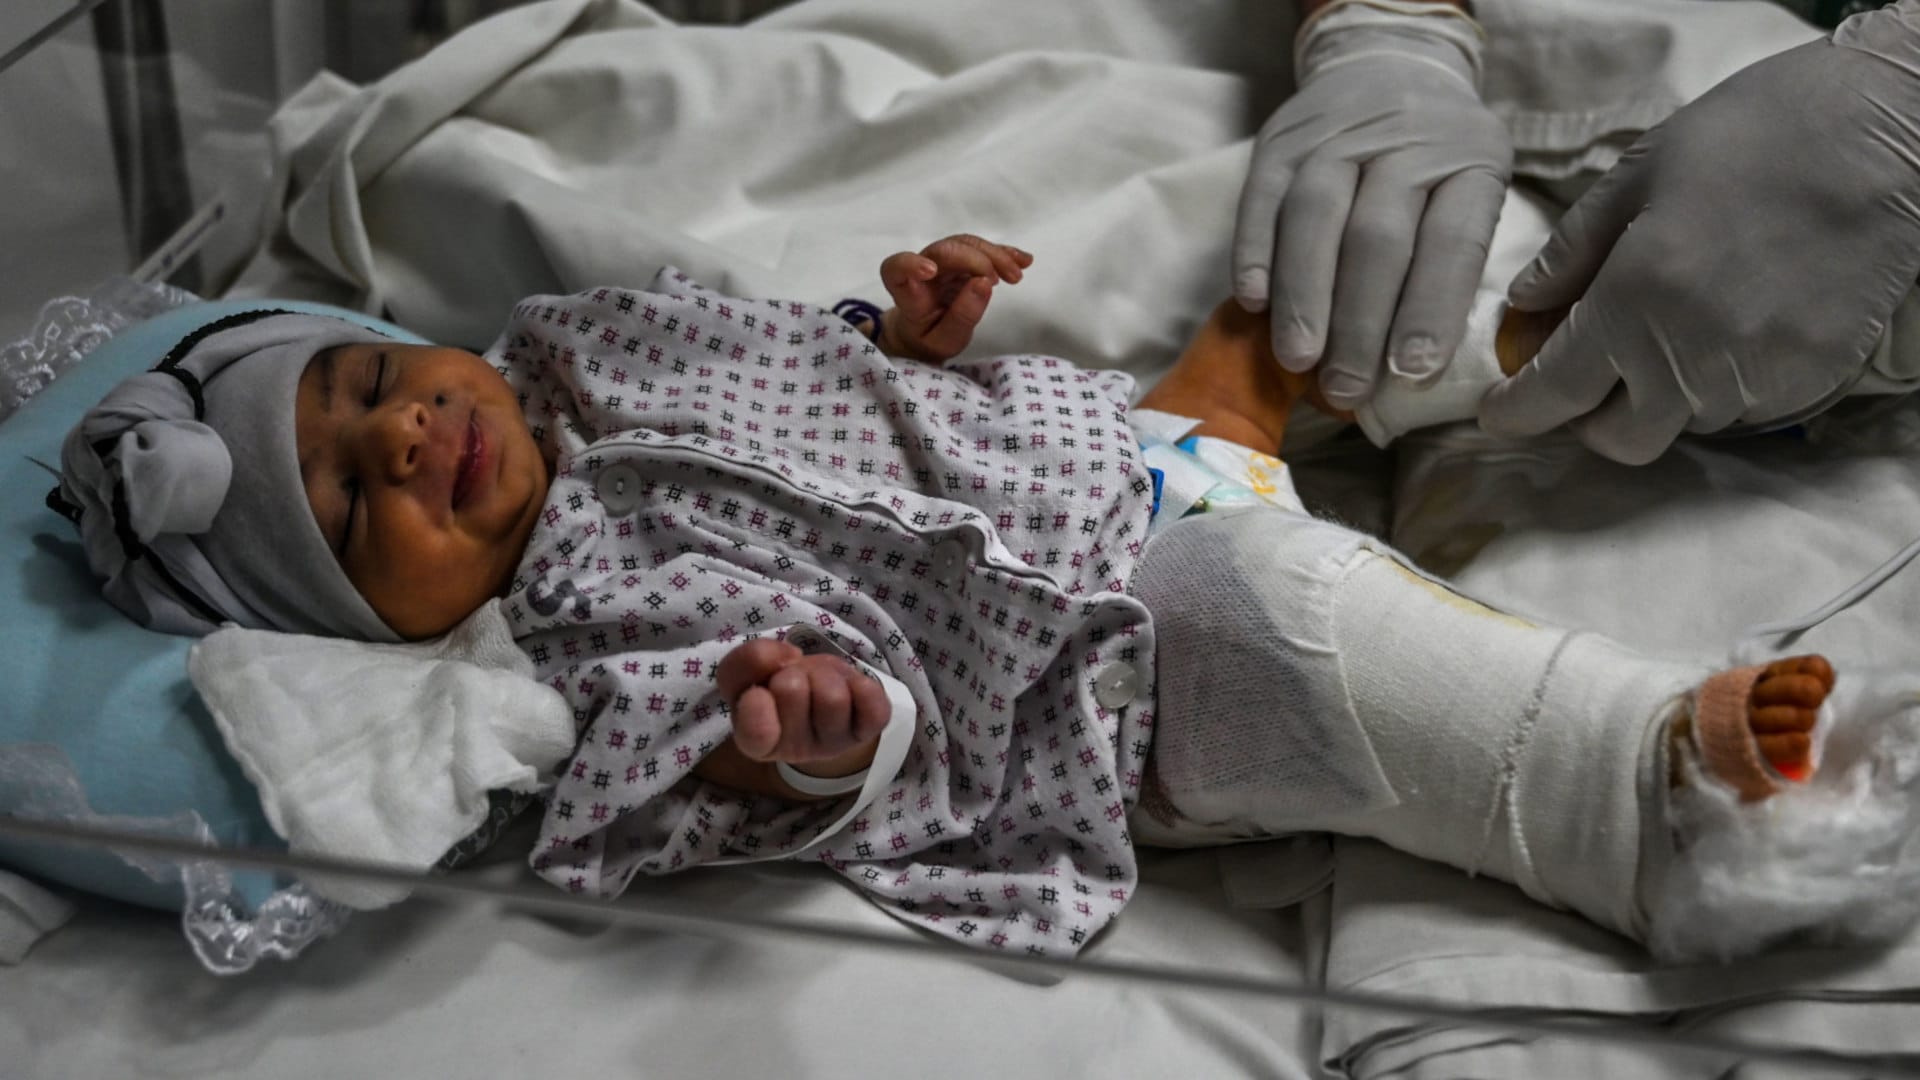 Rafiullah and Nazia's newborn, Amina, receives treatment for the gun wound in her leg at the French Medical Institute for Children in Kabul. Nazia was killed in the attack on a maternity ward of the Dasht-e-Barchi Hospital.